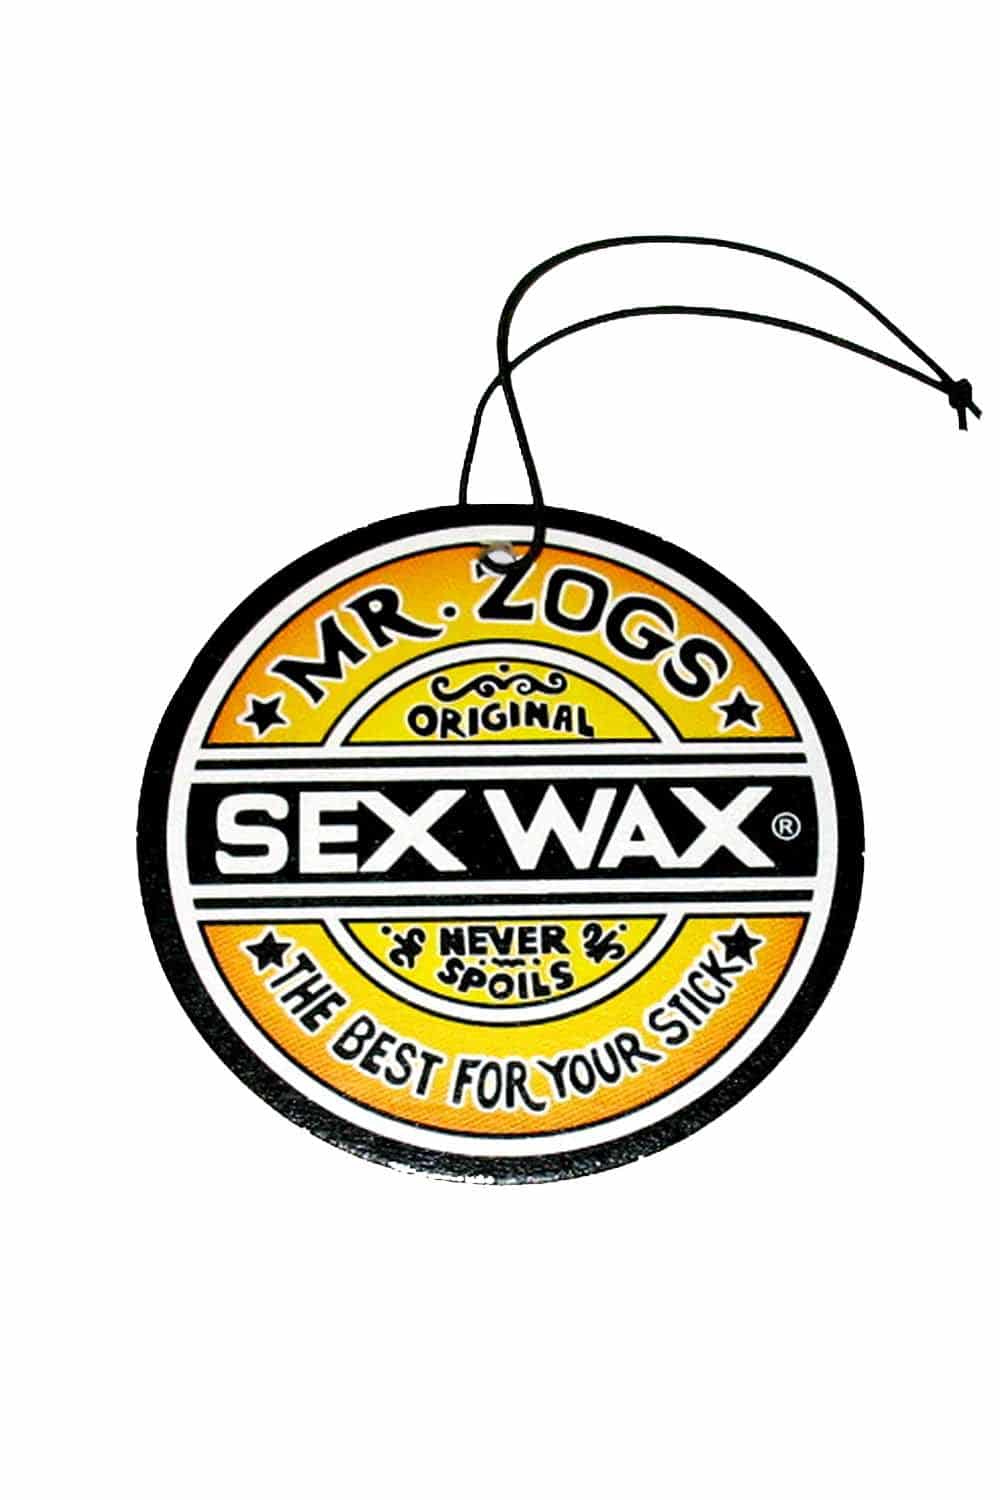  Sex Wax Coconut Air Fresheners: (4-Pack) : Automotive